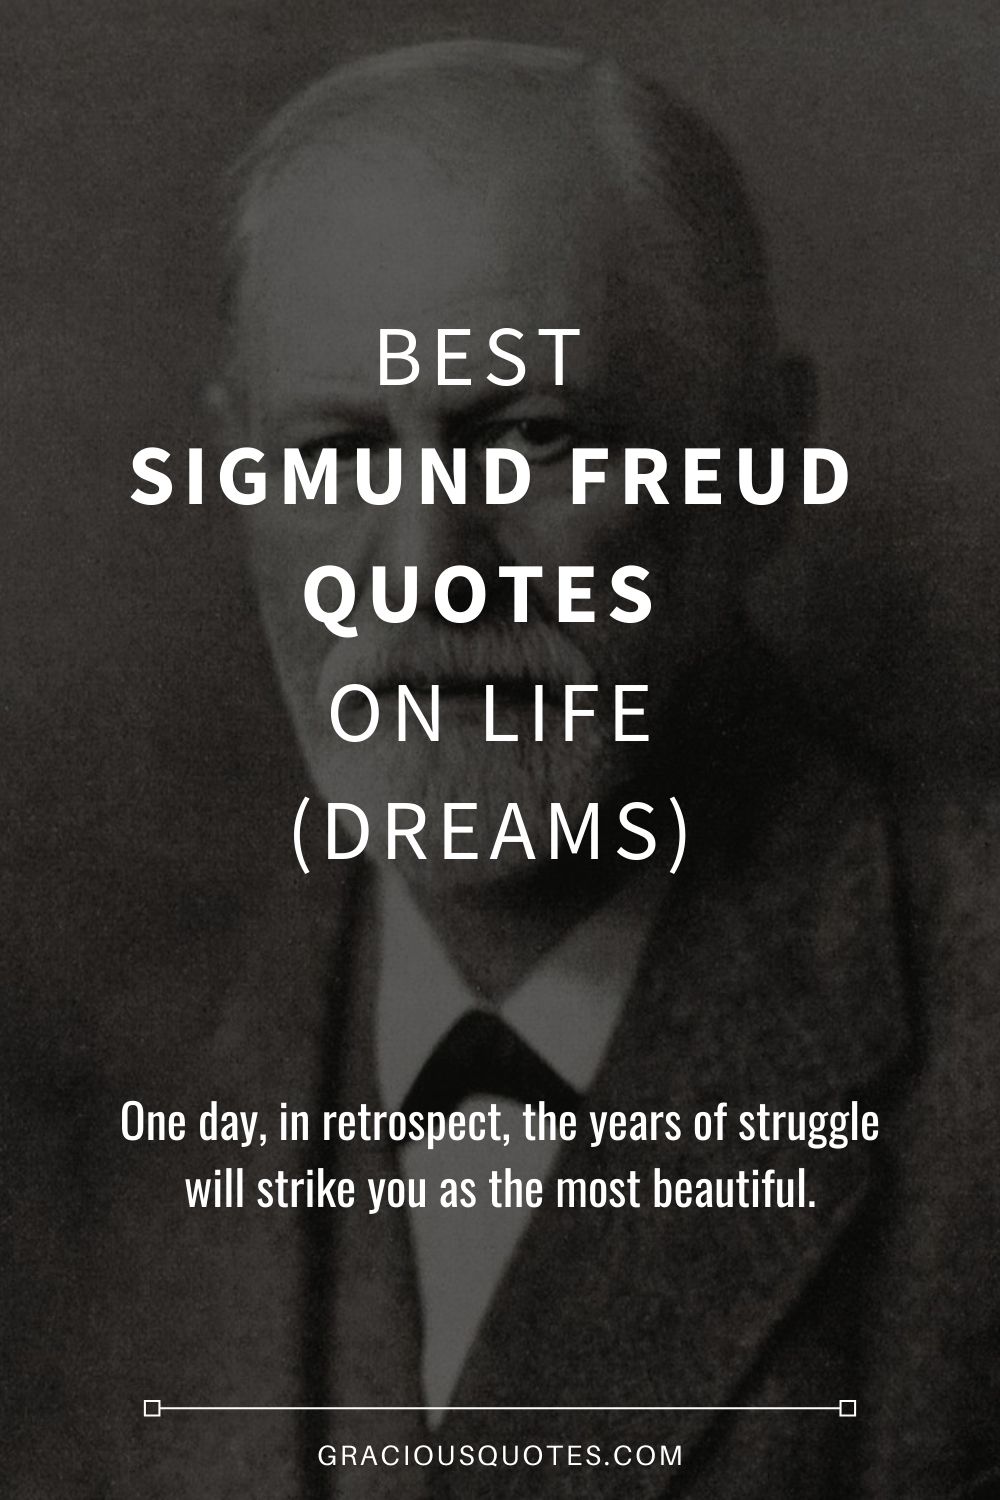 Best Sigmund Freud Quotes on Life (DREAMS) - Gracious Quotes